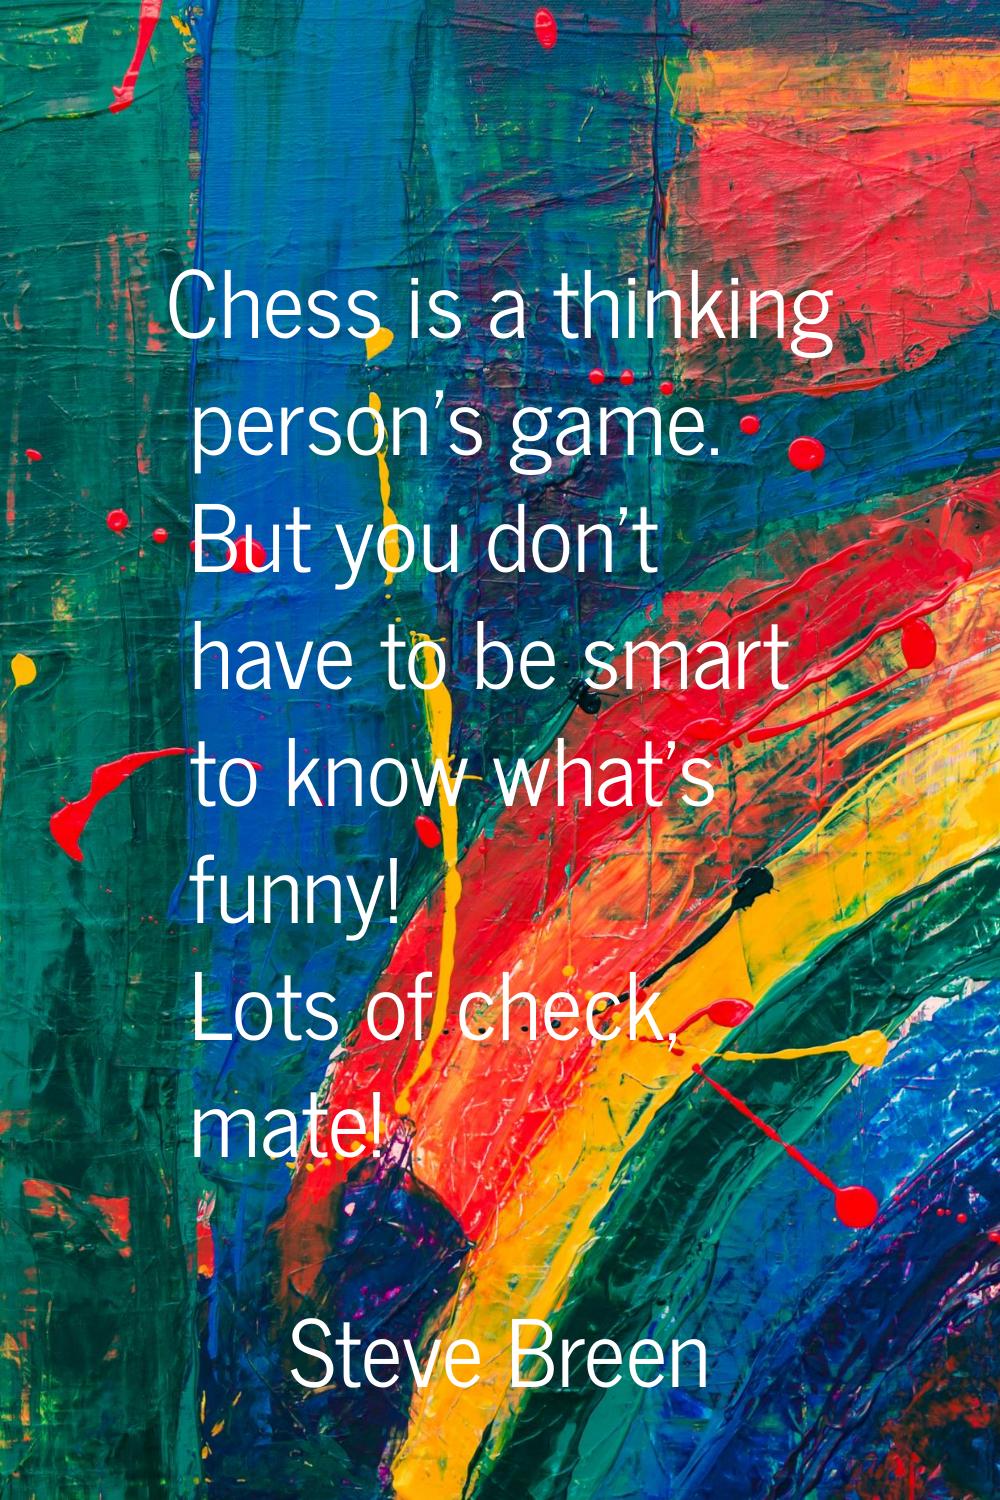 Chess is a thinking person's game. But you don't have to be smart to know what's funny! Lots of che